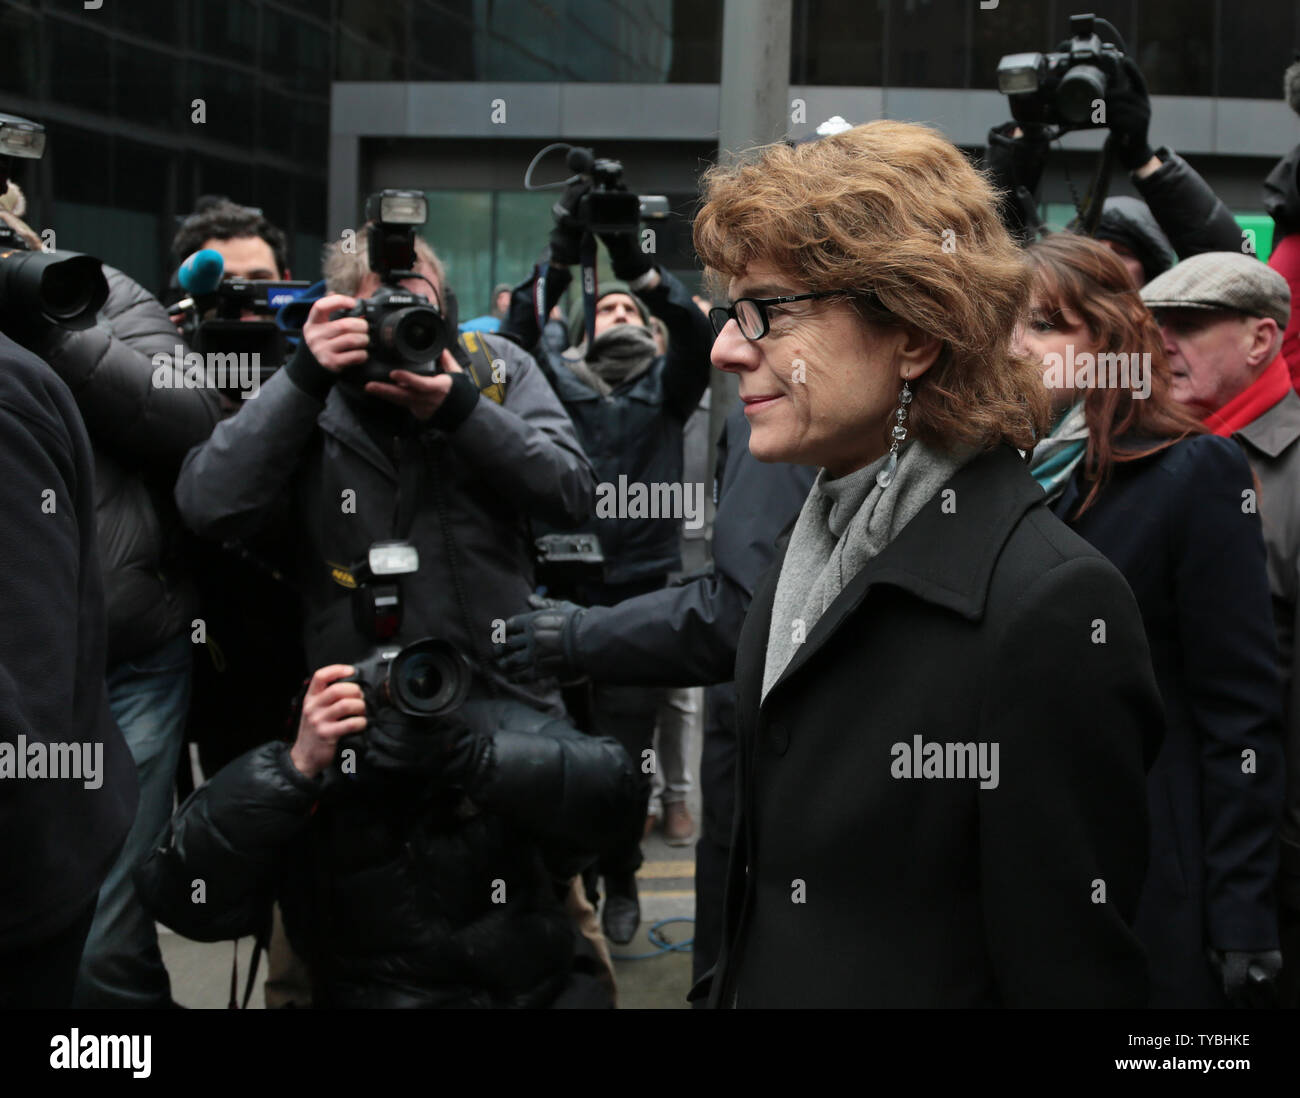 Vicky Pryce arrives at Southwark Crown Court for sentencing in London after being found guilty of perverting the course of justice on March 11, 2013. Ms Pryce's ex-husband the disgraced former Energy Minister Chris Huhne admitted a guilty plea last week to a charge of forcing his wife to take penalty points on her driving license when he was caught speeding in 2003.       UPI/Hugo Philpott Stock Photo